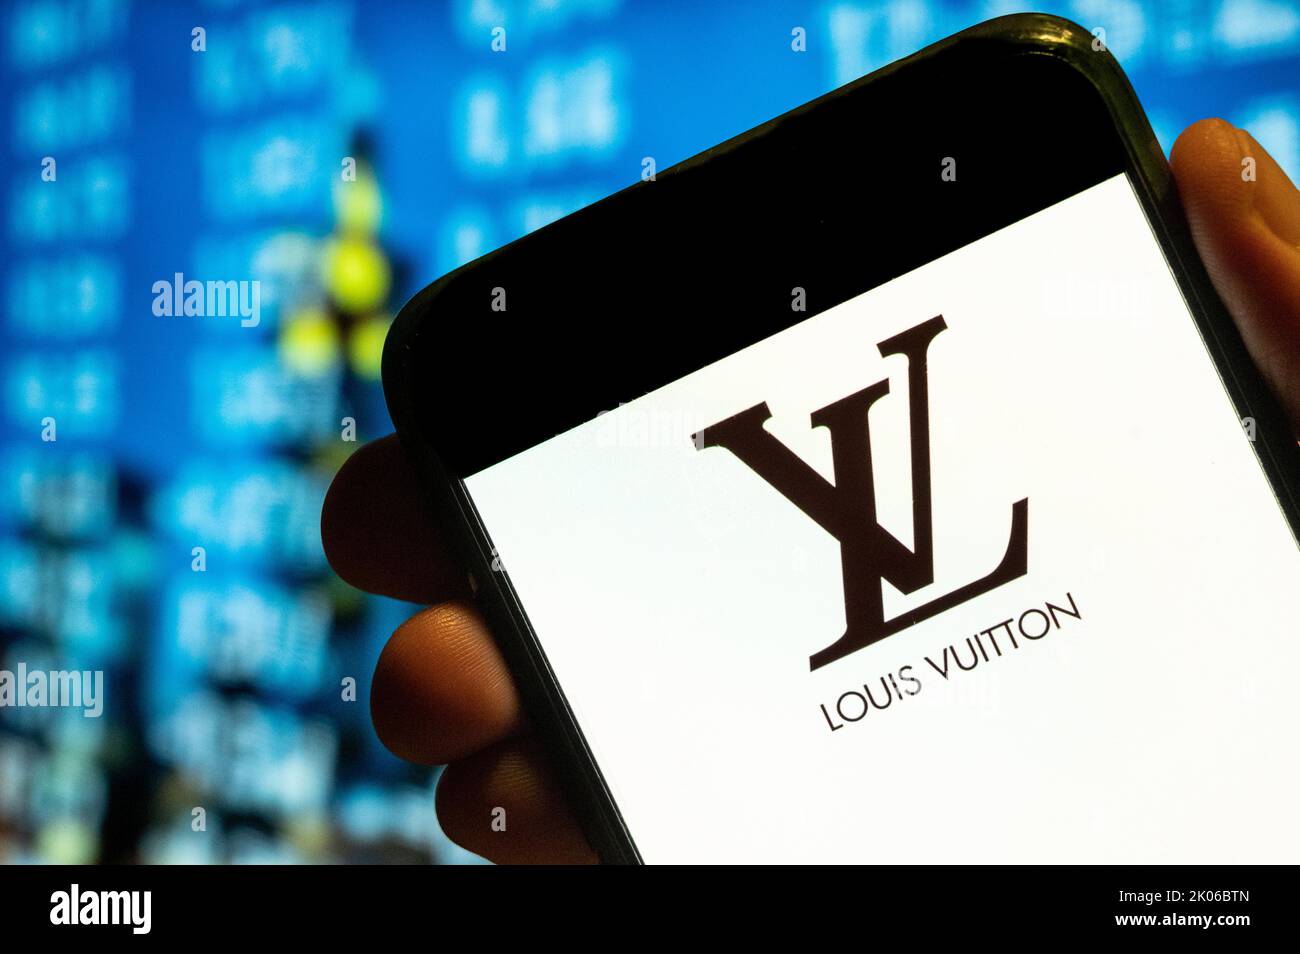 Vuitton logo Cut Out Stock Images & Pictures - Alamy